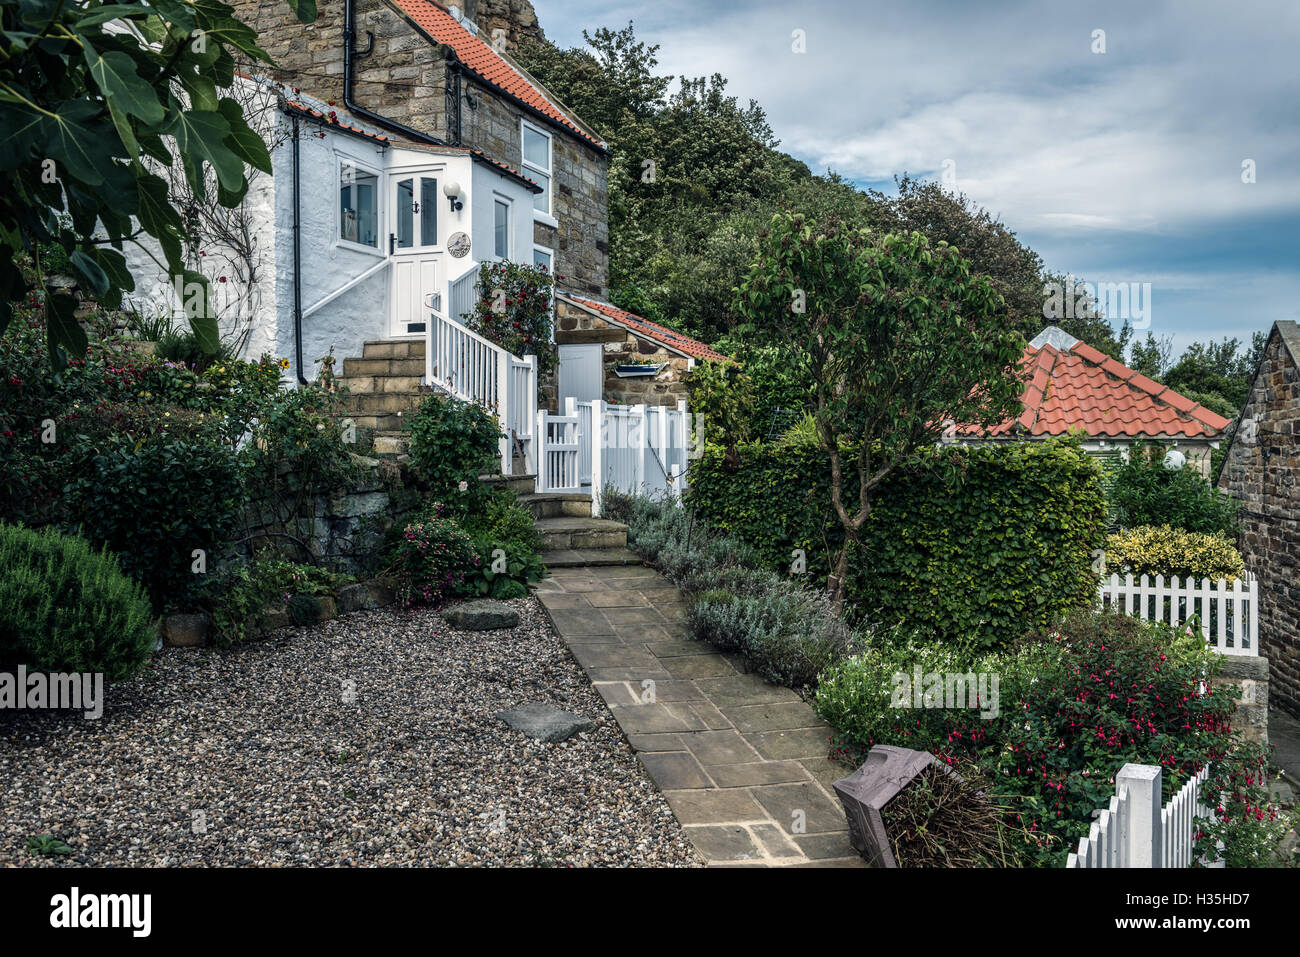 Cottages at Runswick Bay in the North Yorks Moors Stock Photo